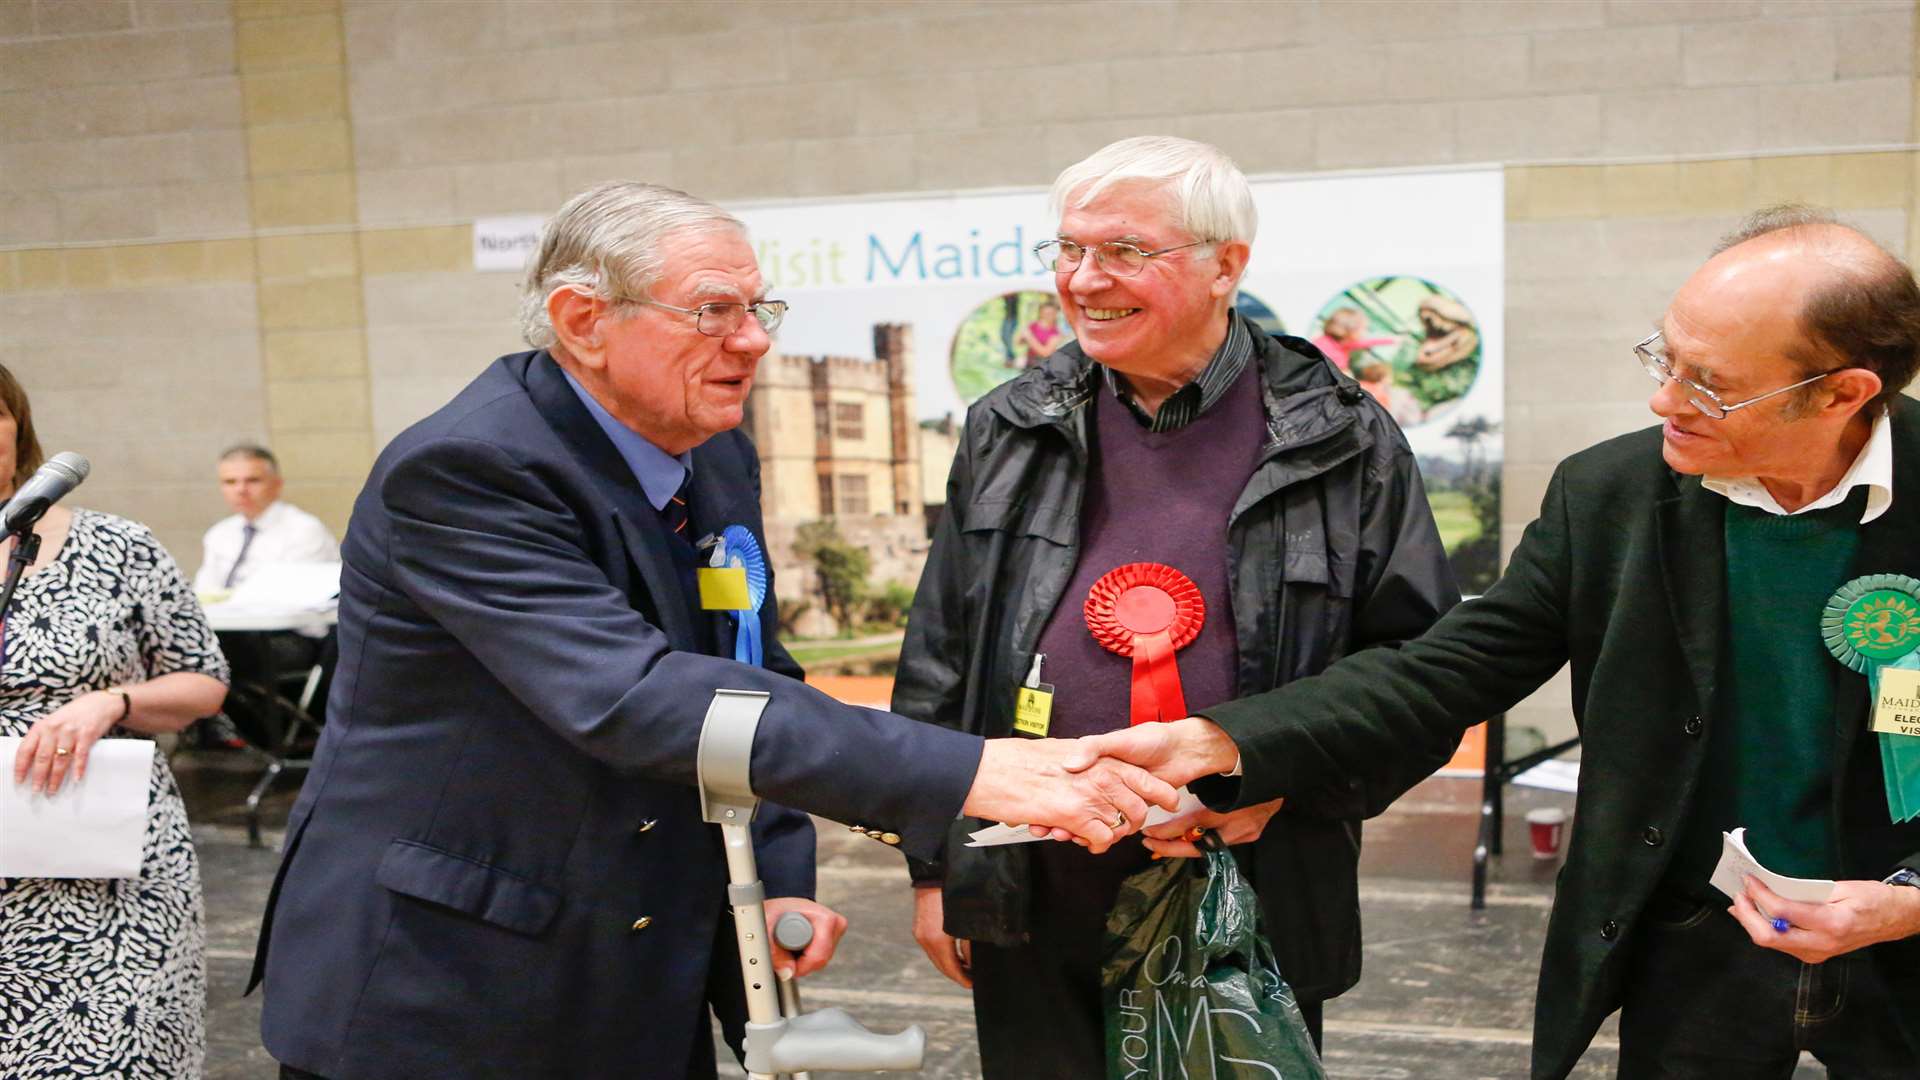 Alistair Black (left) being congratulated by the other candidates when he was re-elected to Fant Ward in May this year.